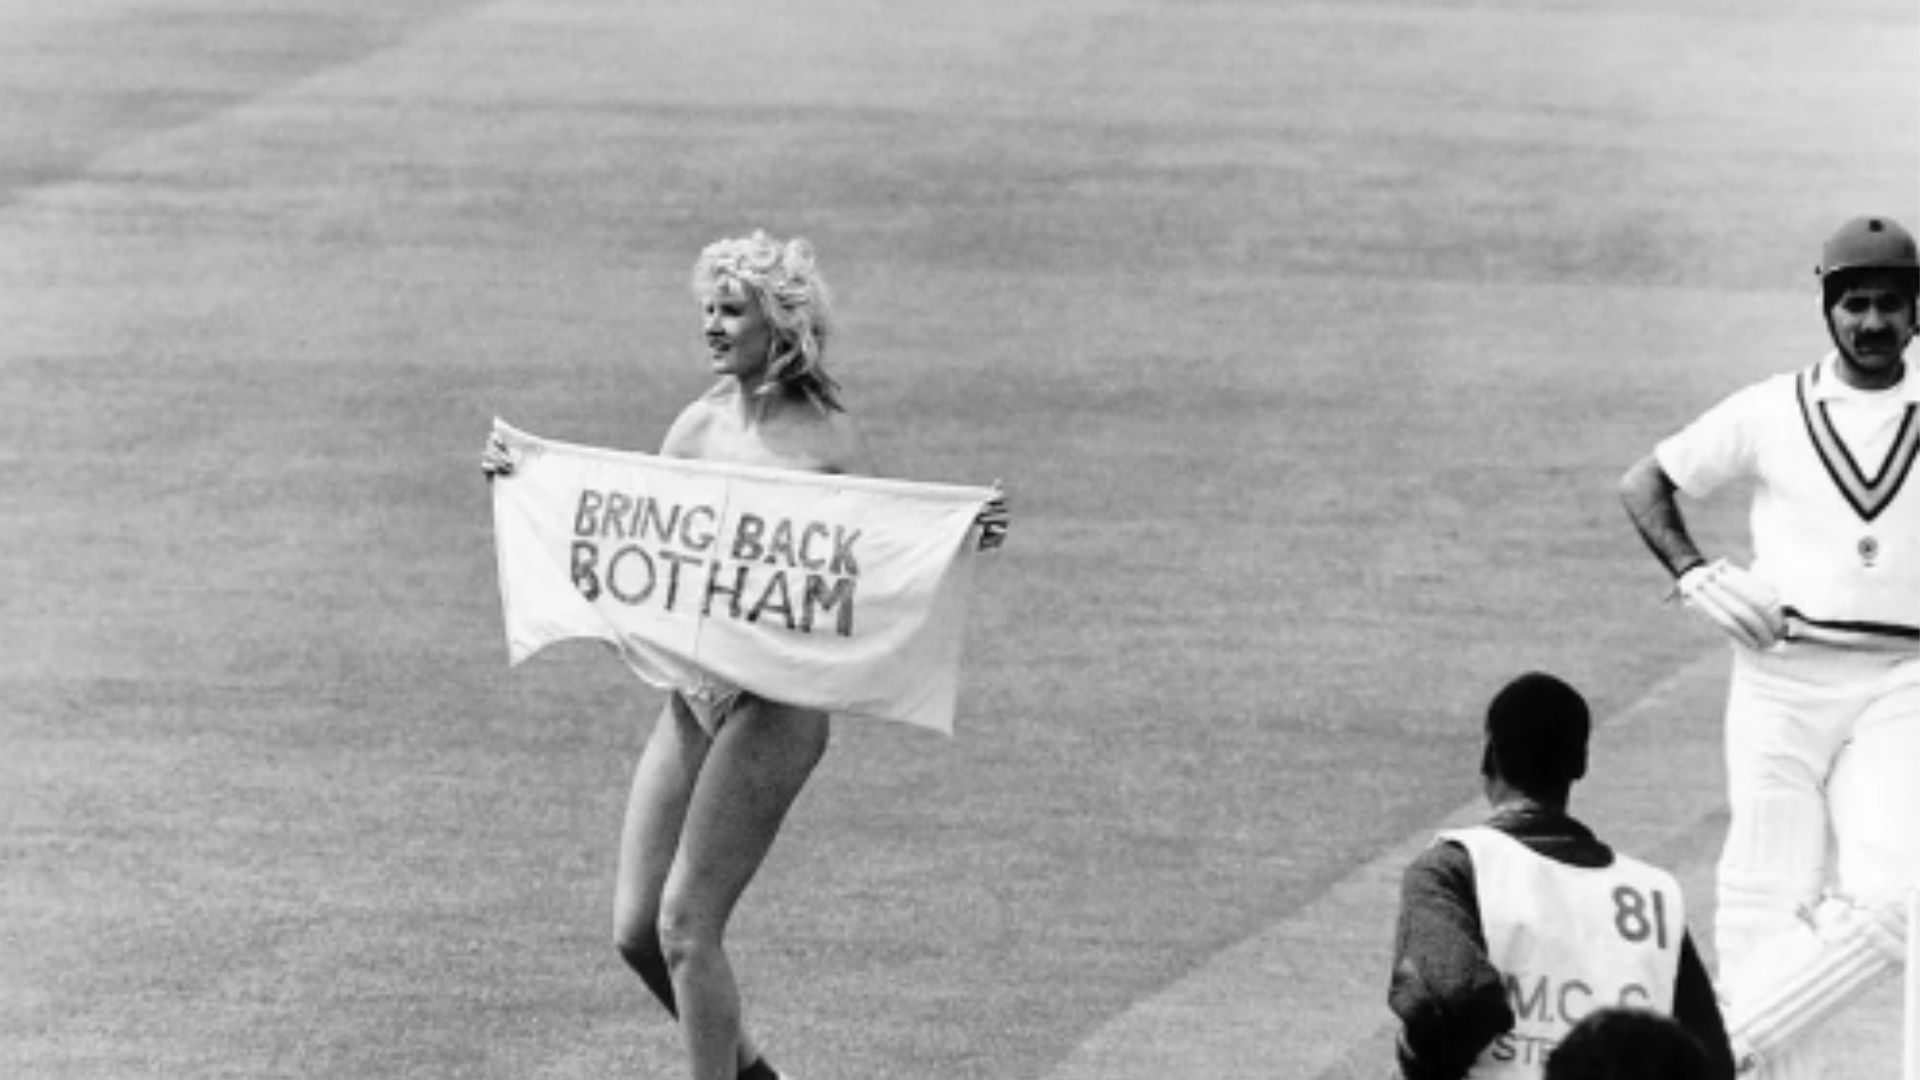 The streaker during a 1986 Test between India and England.